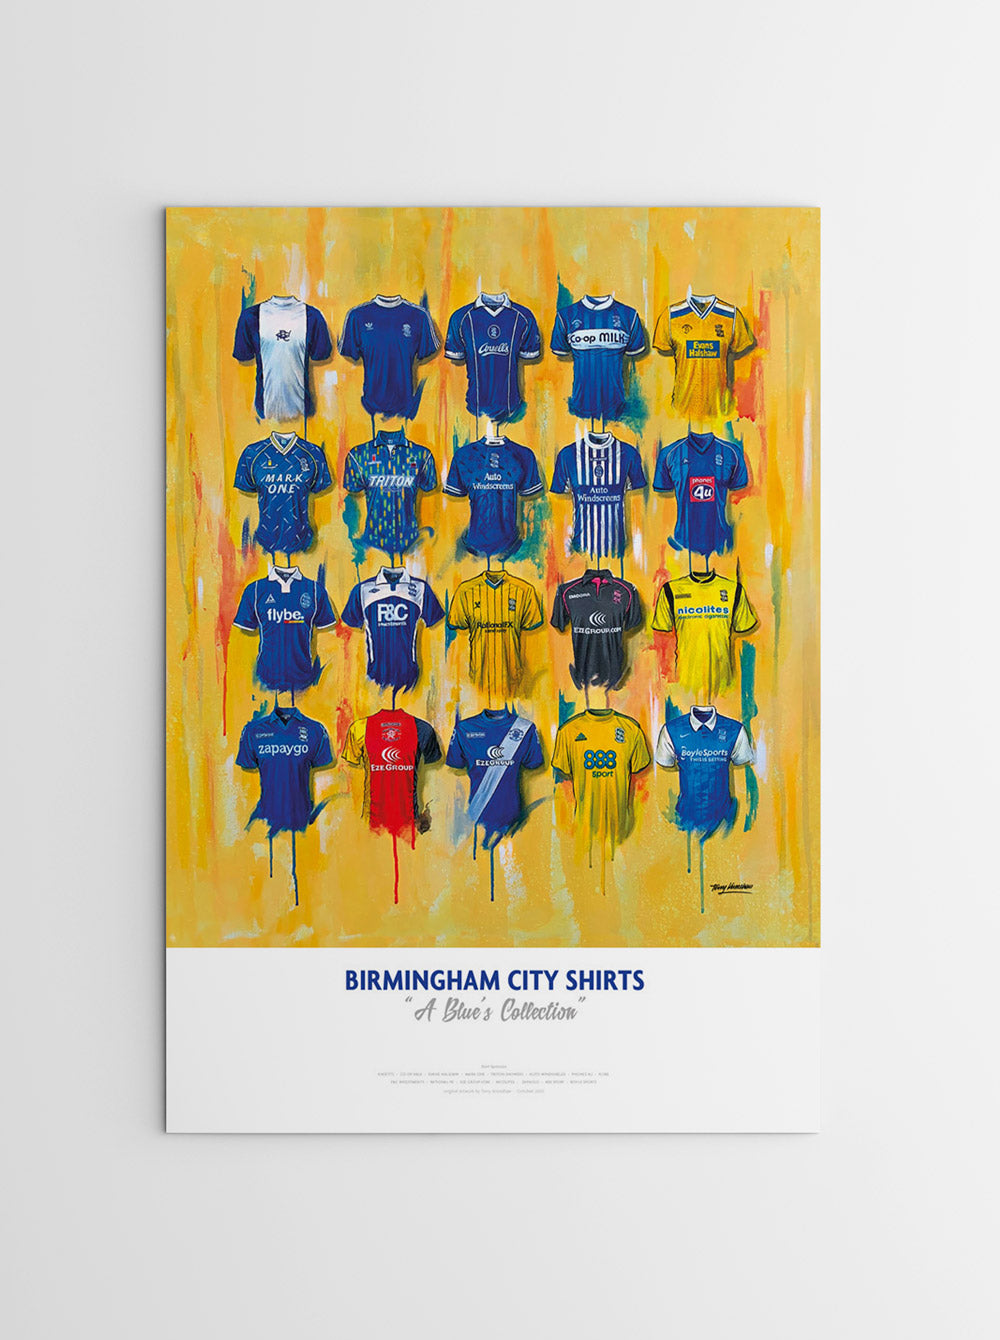 A high-quality limited edition A2 print featuring 20 iconic Birmingham City football jerseys worn by the club's legends throughout their history. The kits are mainly blue or white, with blue accents and feature the Birmingham City crest, kit manufacturer, and shirt sponsor logos on the front. The artwork is a high-quality print of a hand-painted original, which uses textured brushstrokes to create a dynamic effect.